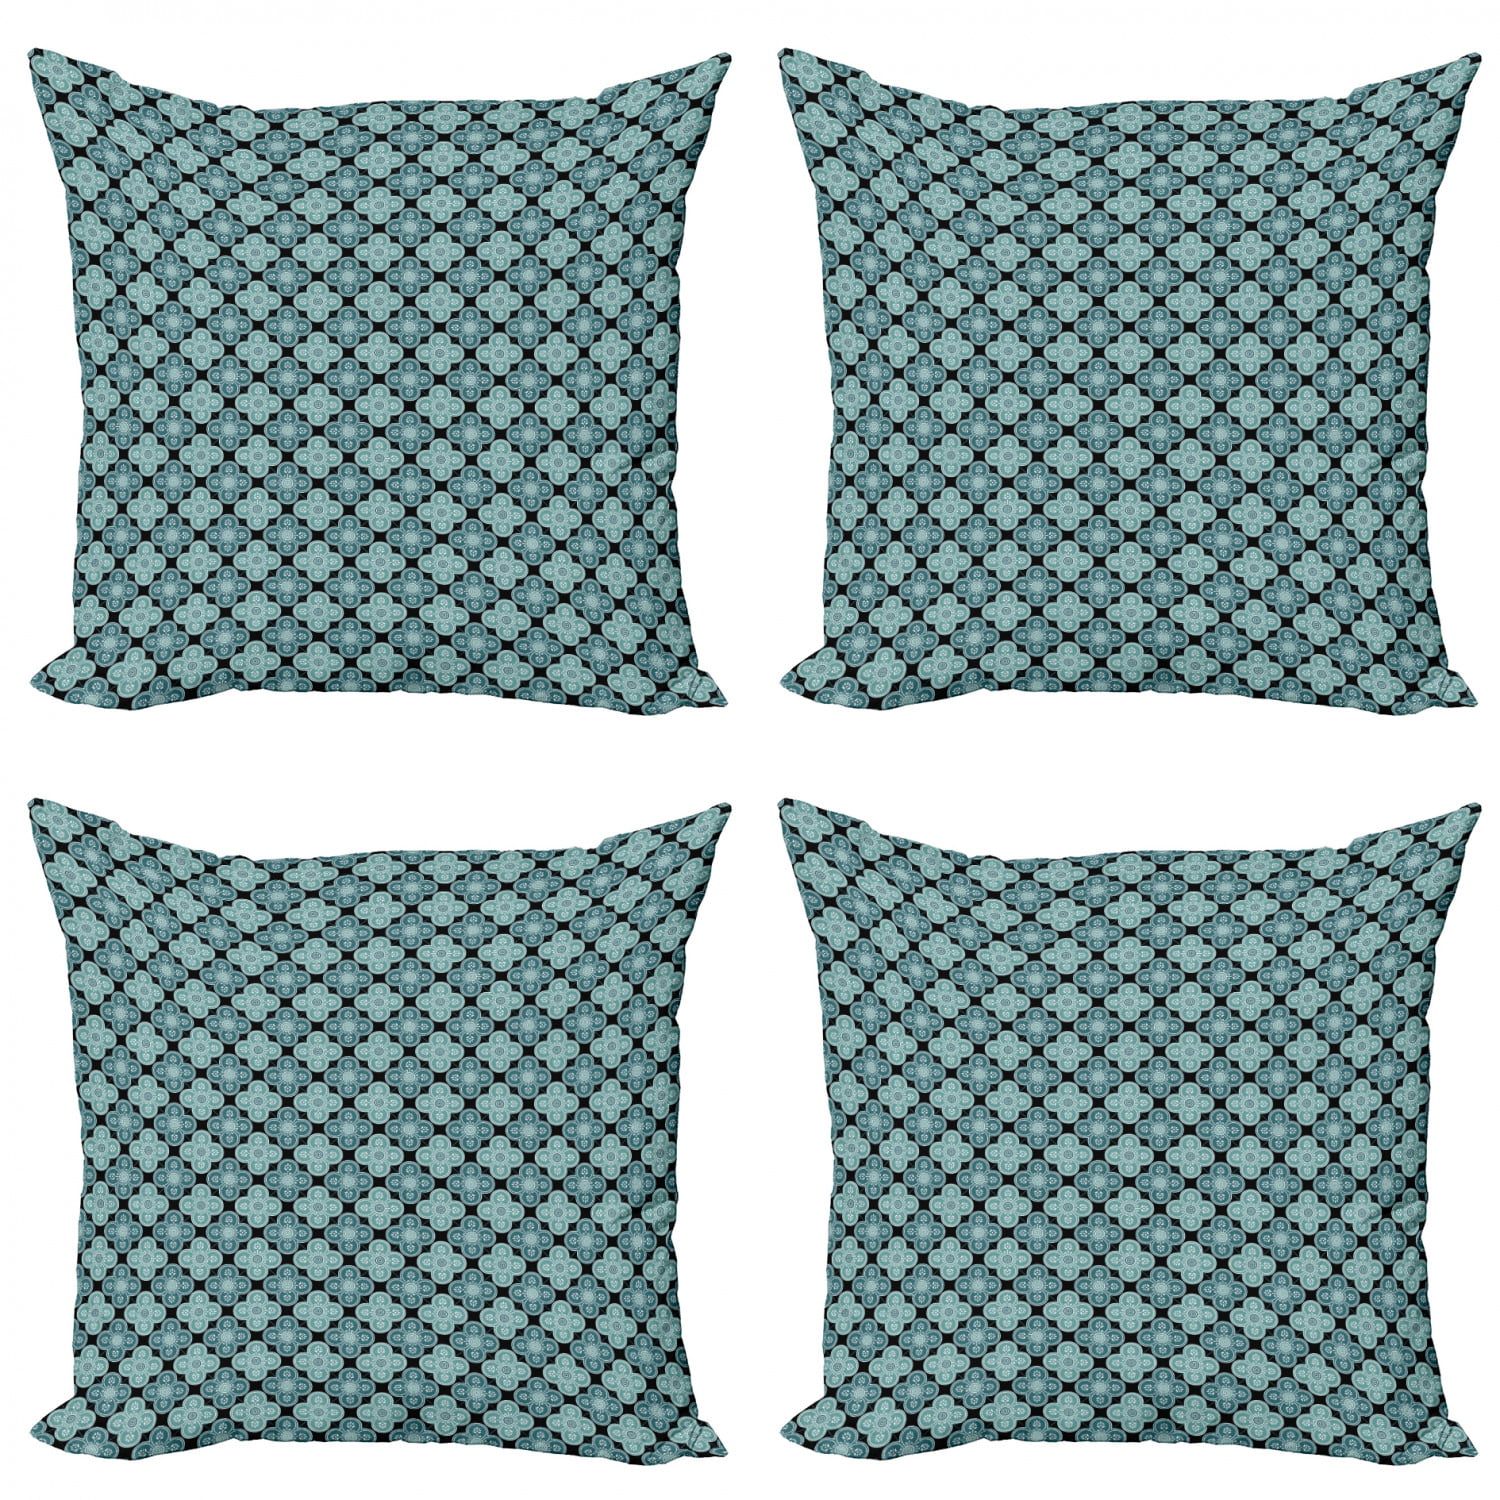 Plutus Brands Blue Plutus Morocco Damask Luxury Throw Pillow 20 in x 20in Double Sided 20 x 20 